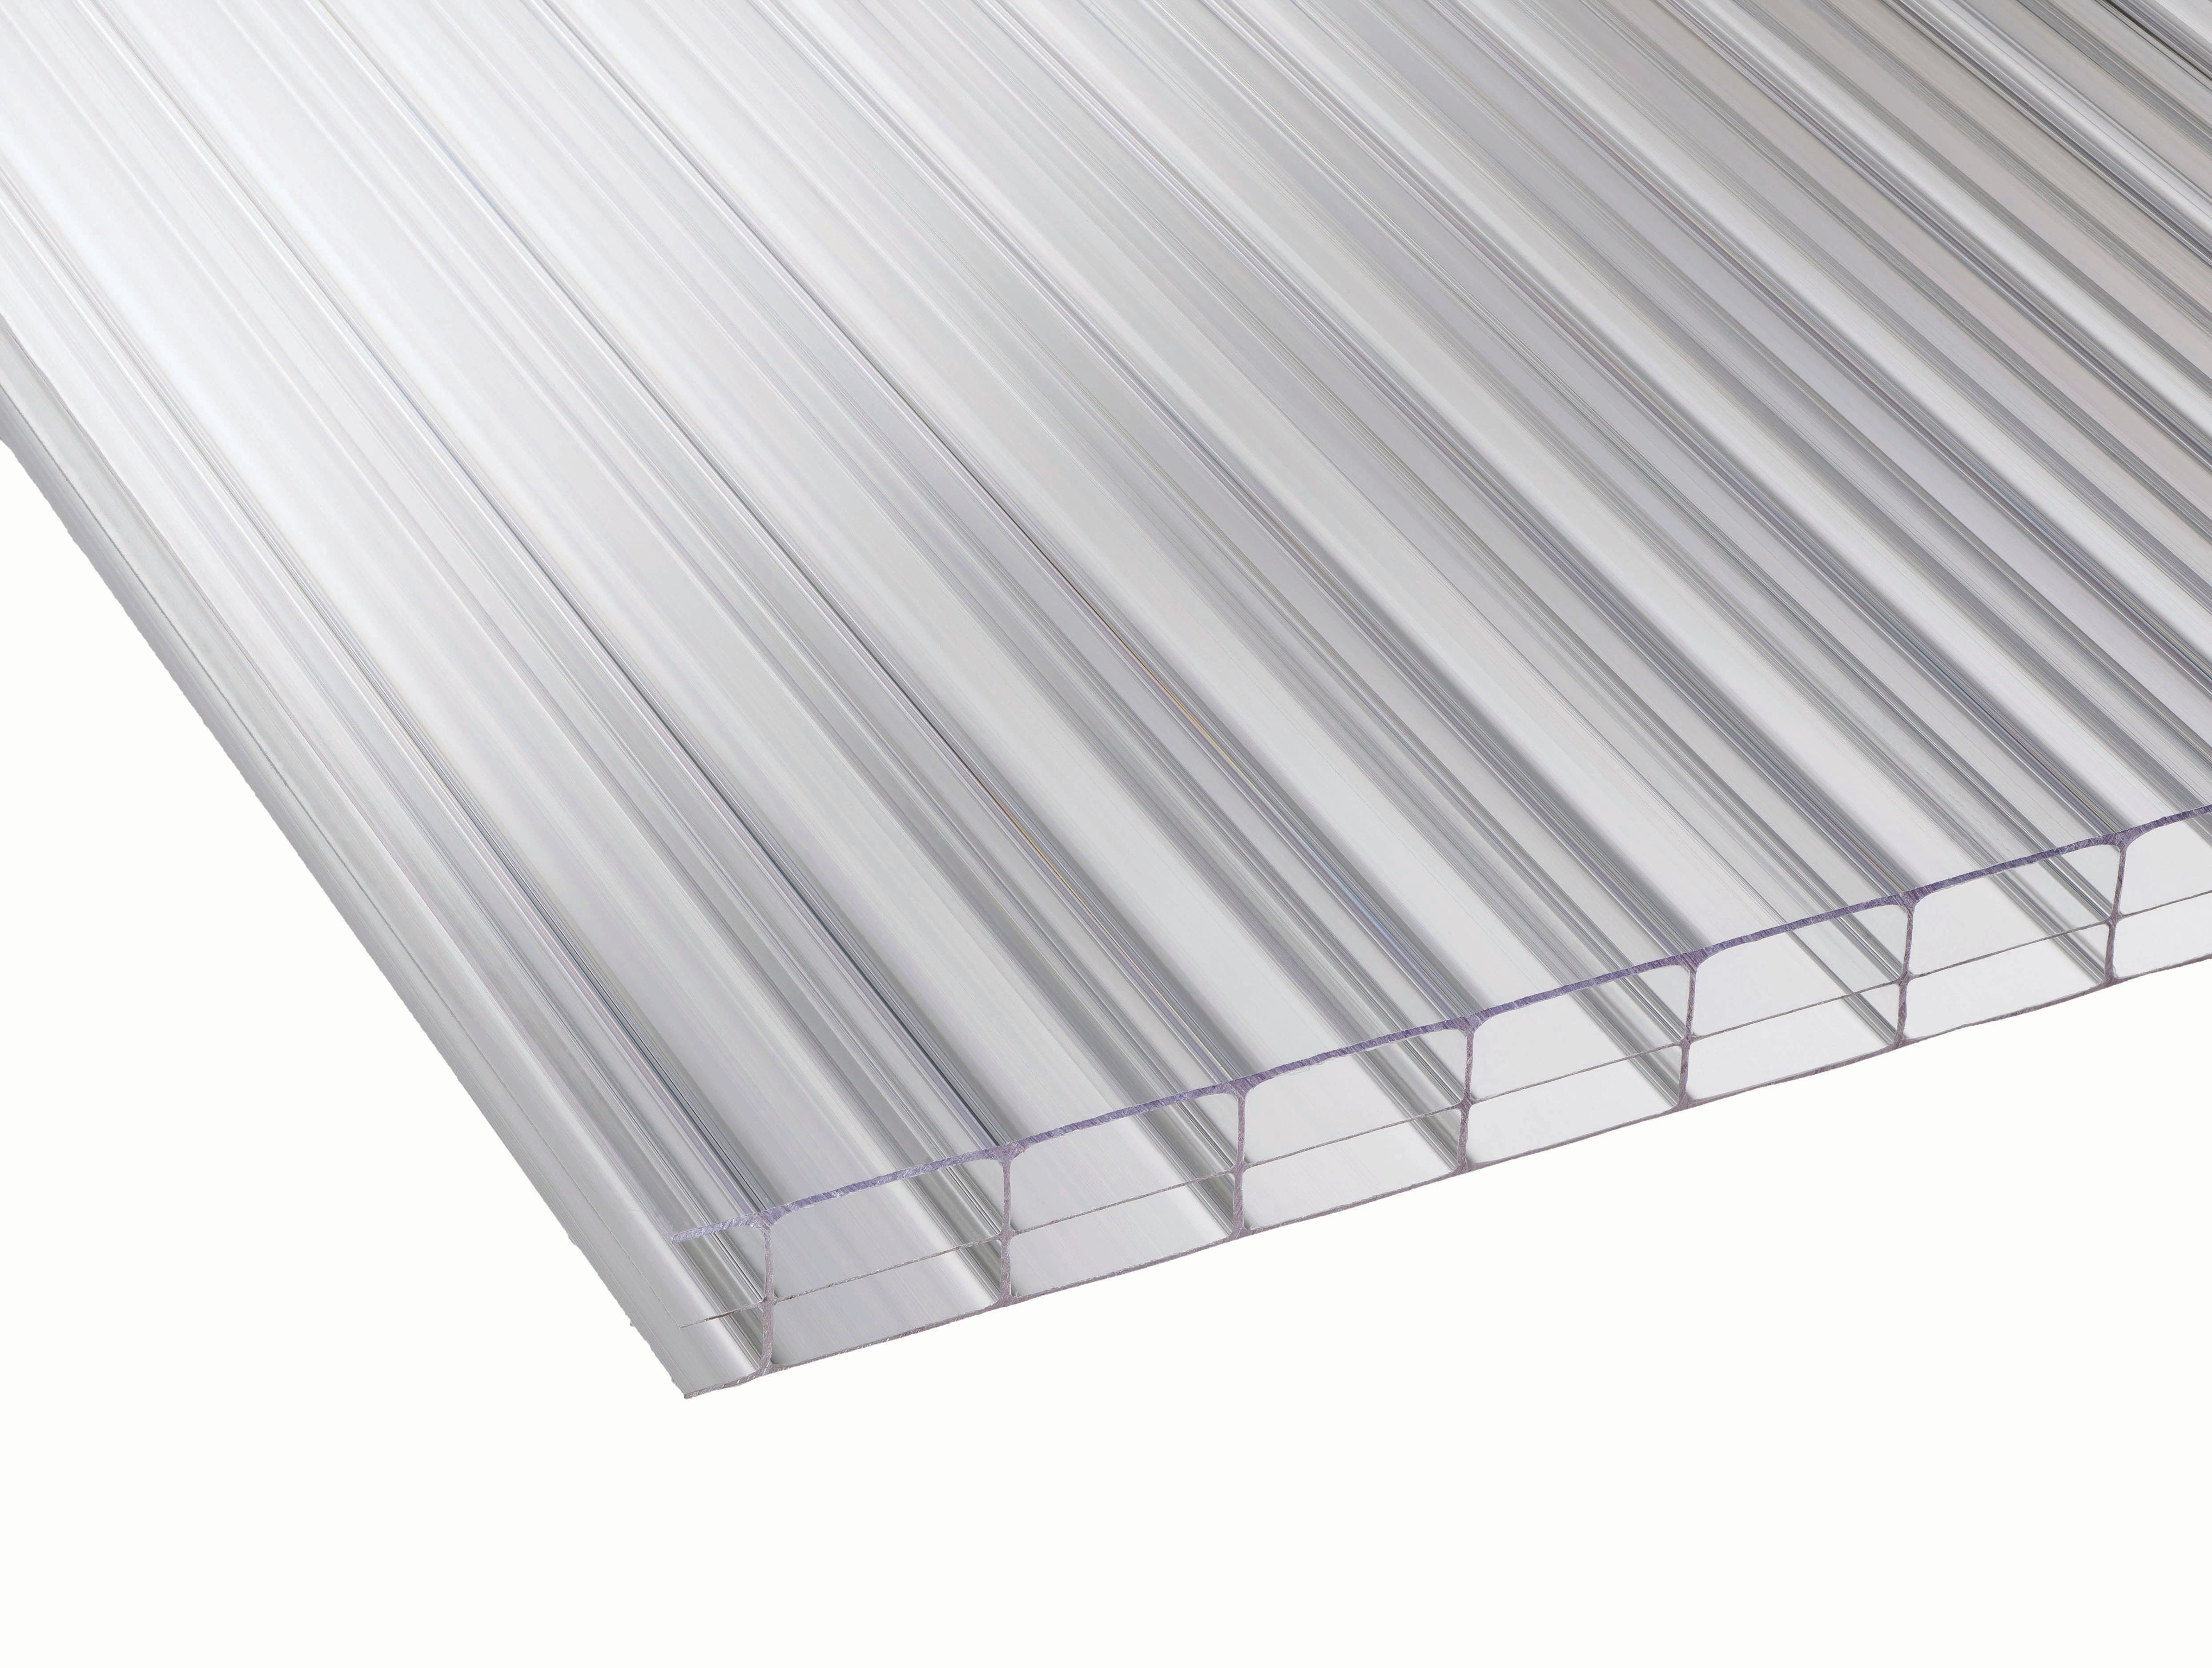 16mm Clear Multiwall Polycarbonate Sheet 2000mm